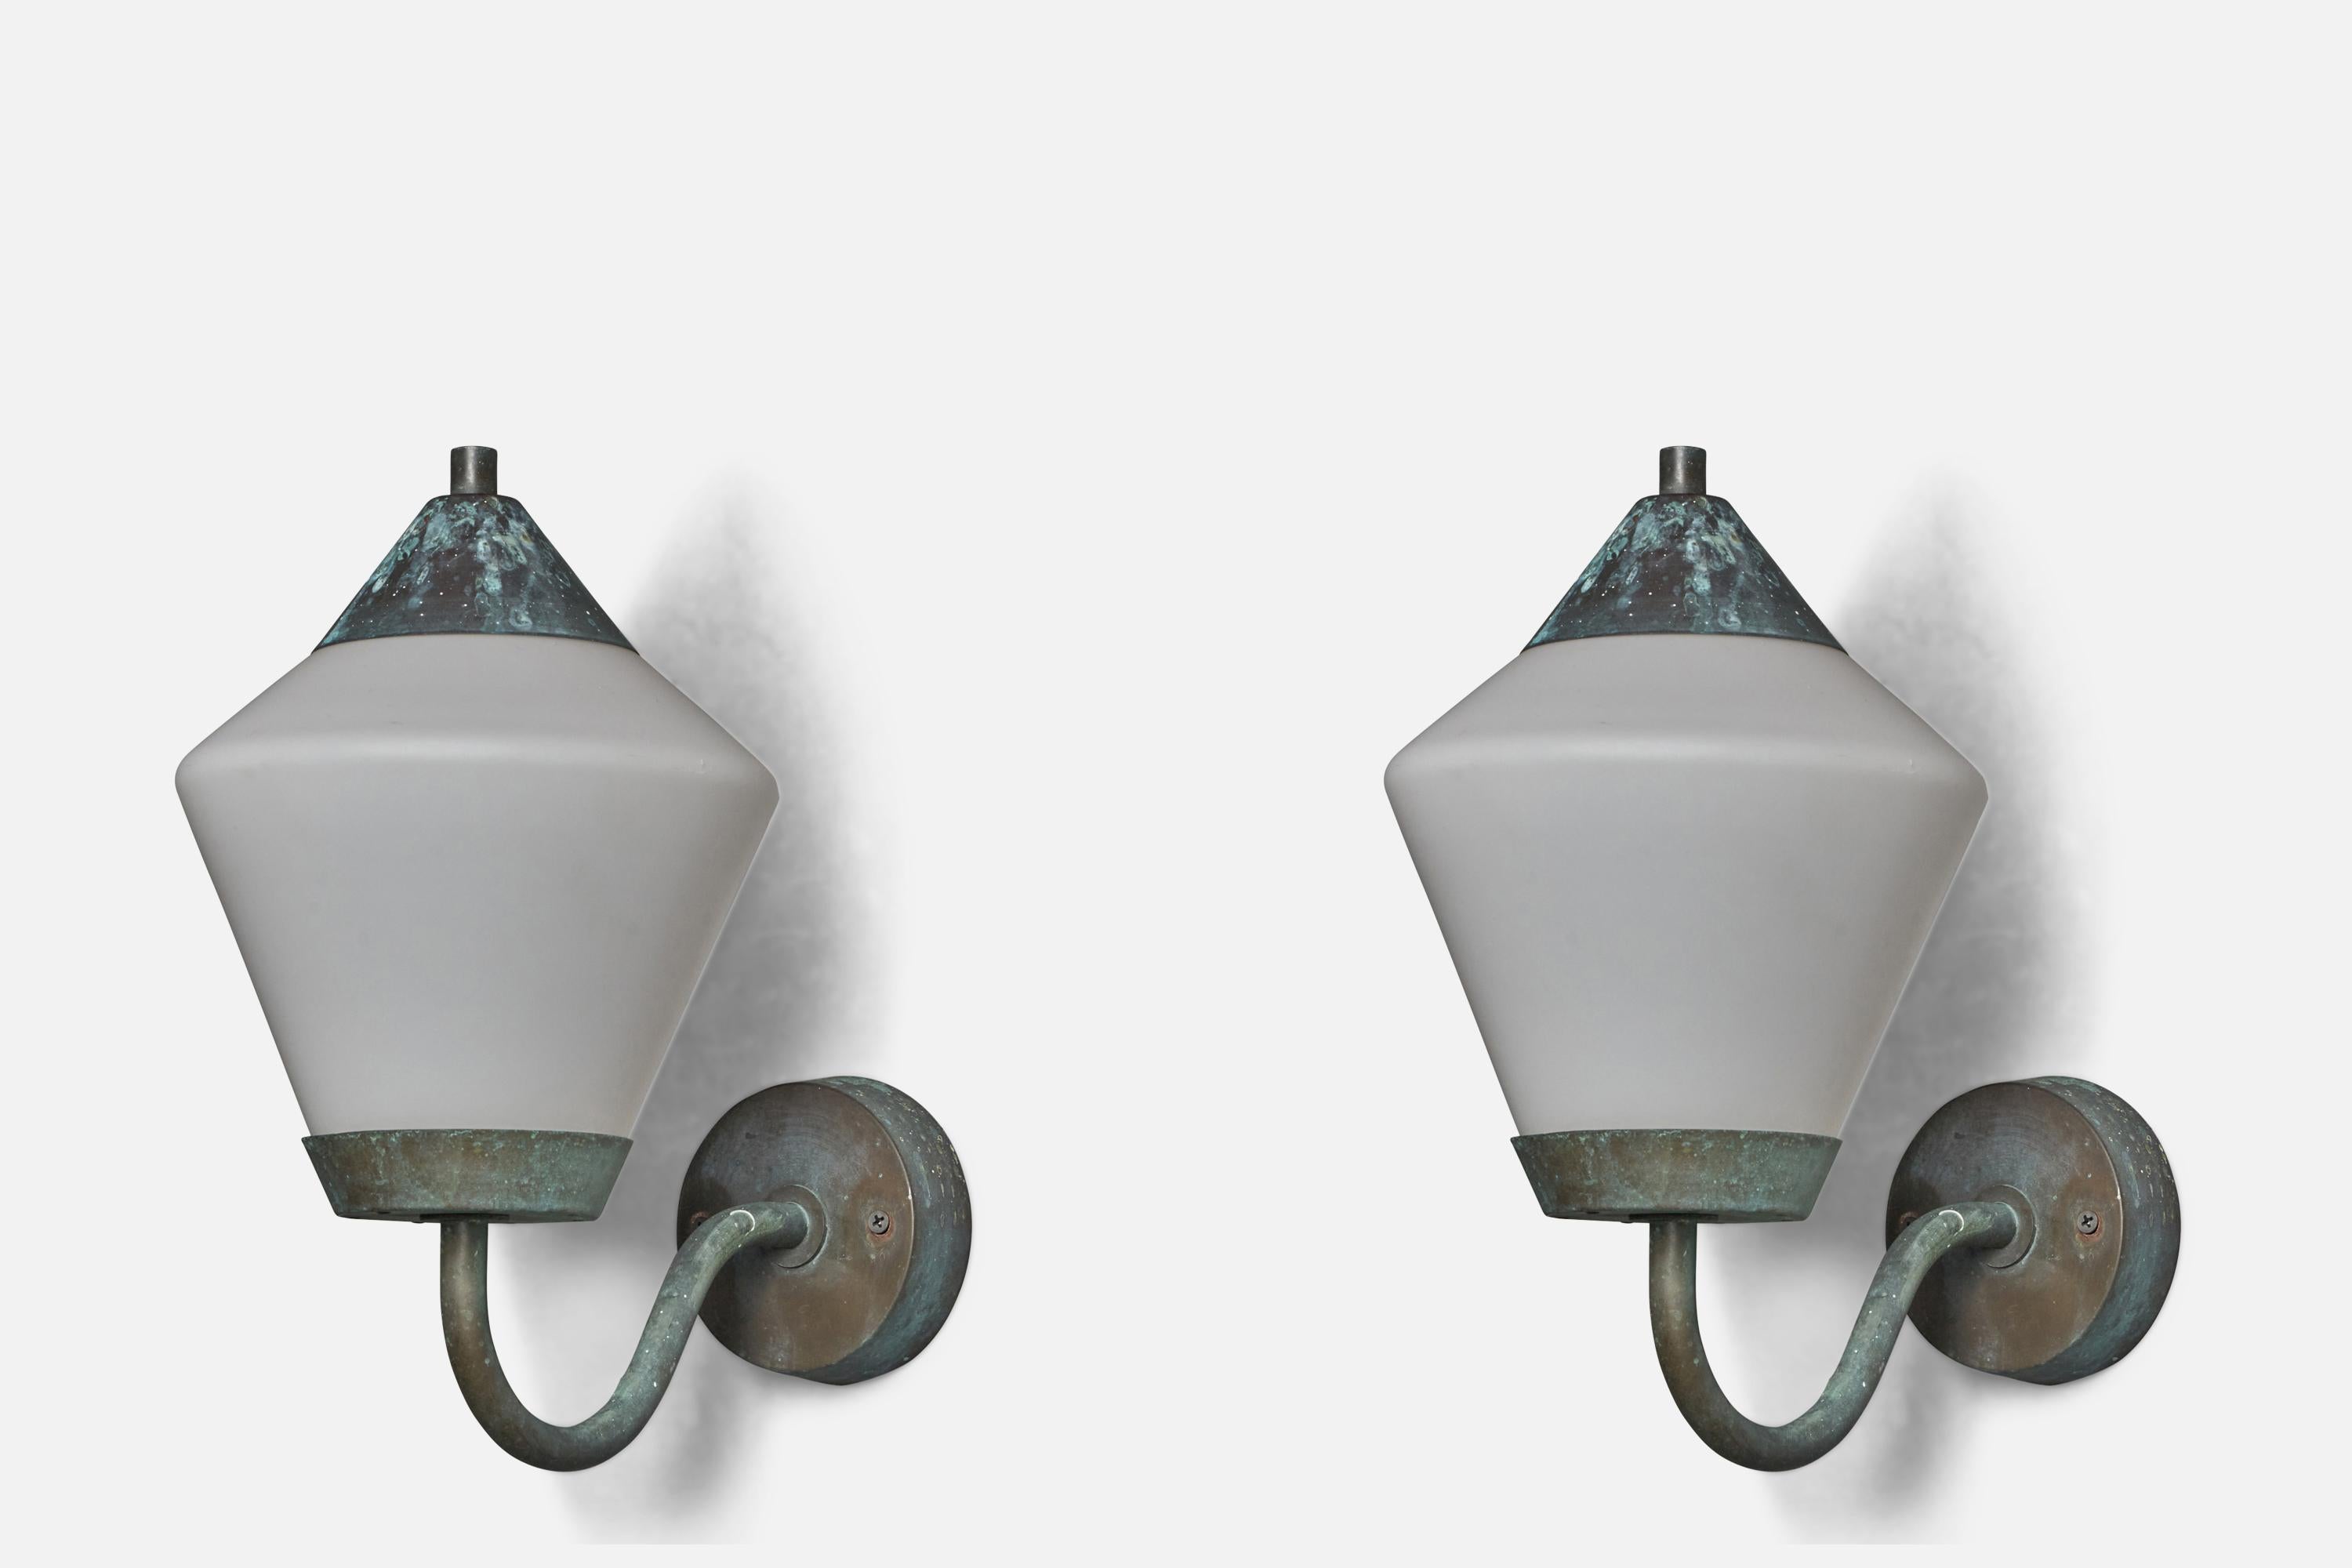 A pair of patinated copper and opaline glass wall lights designed and produced by ASEA, Sweden, c. 1940s.

Overall Dimensions (inches): 13.5” H x 8.5” W x 13” D
Back Plate Dimensions (inches): 4.4” Diameter x 1.25” D
Bulb Specifications: E-26